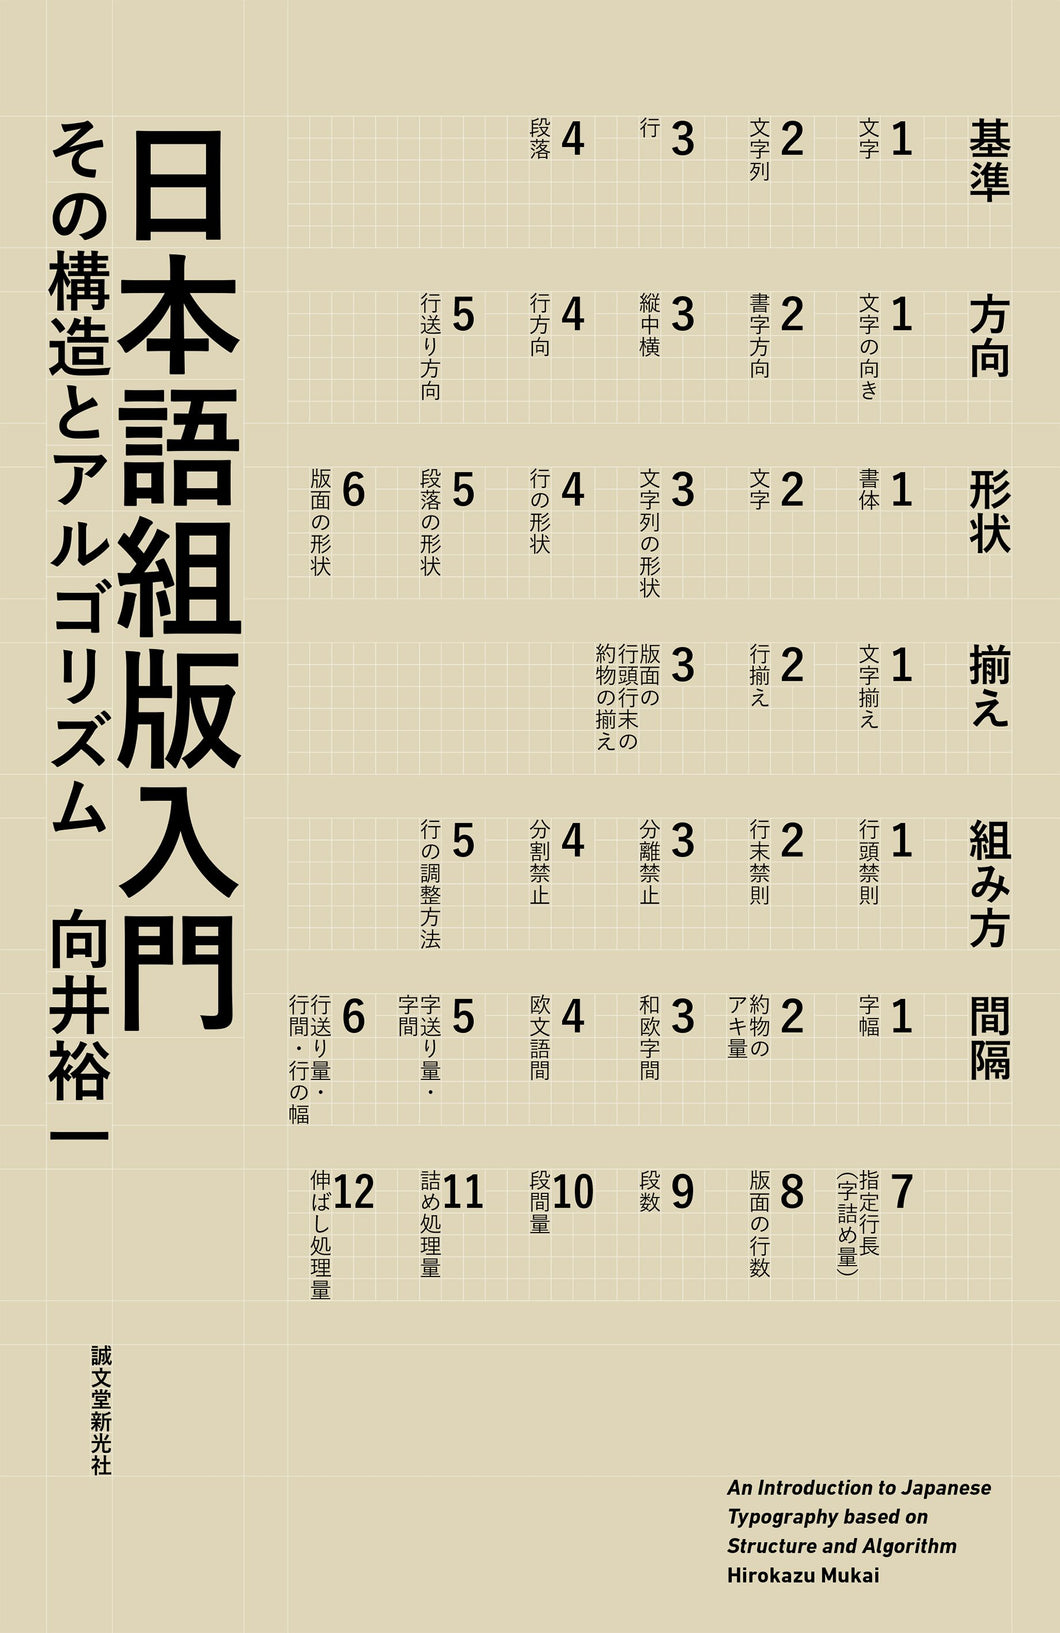 Introduction to Japanese typesetting